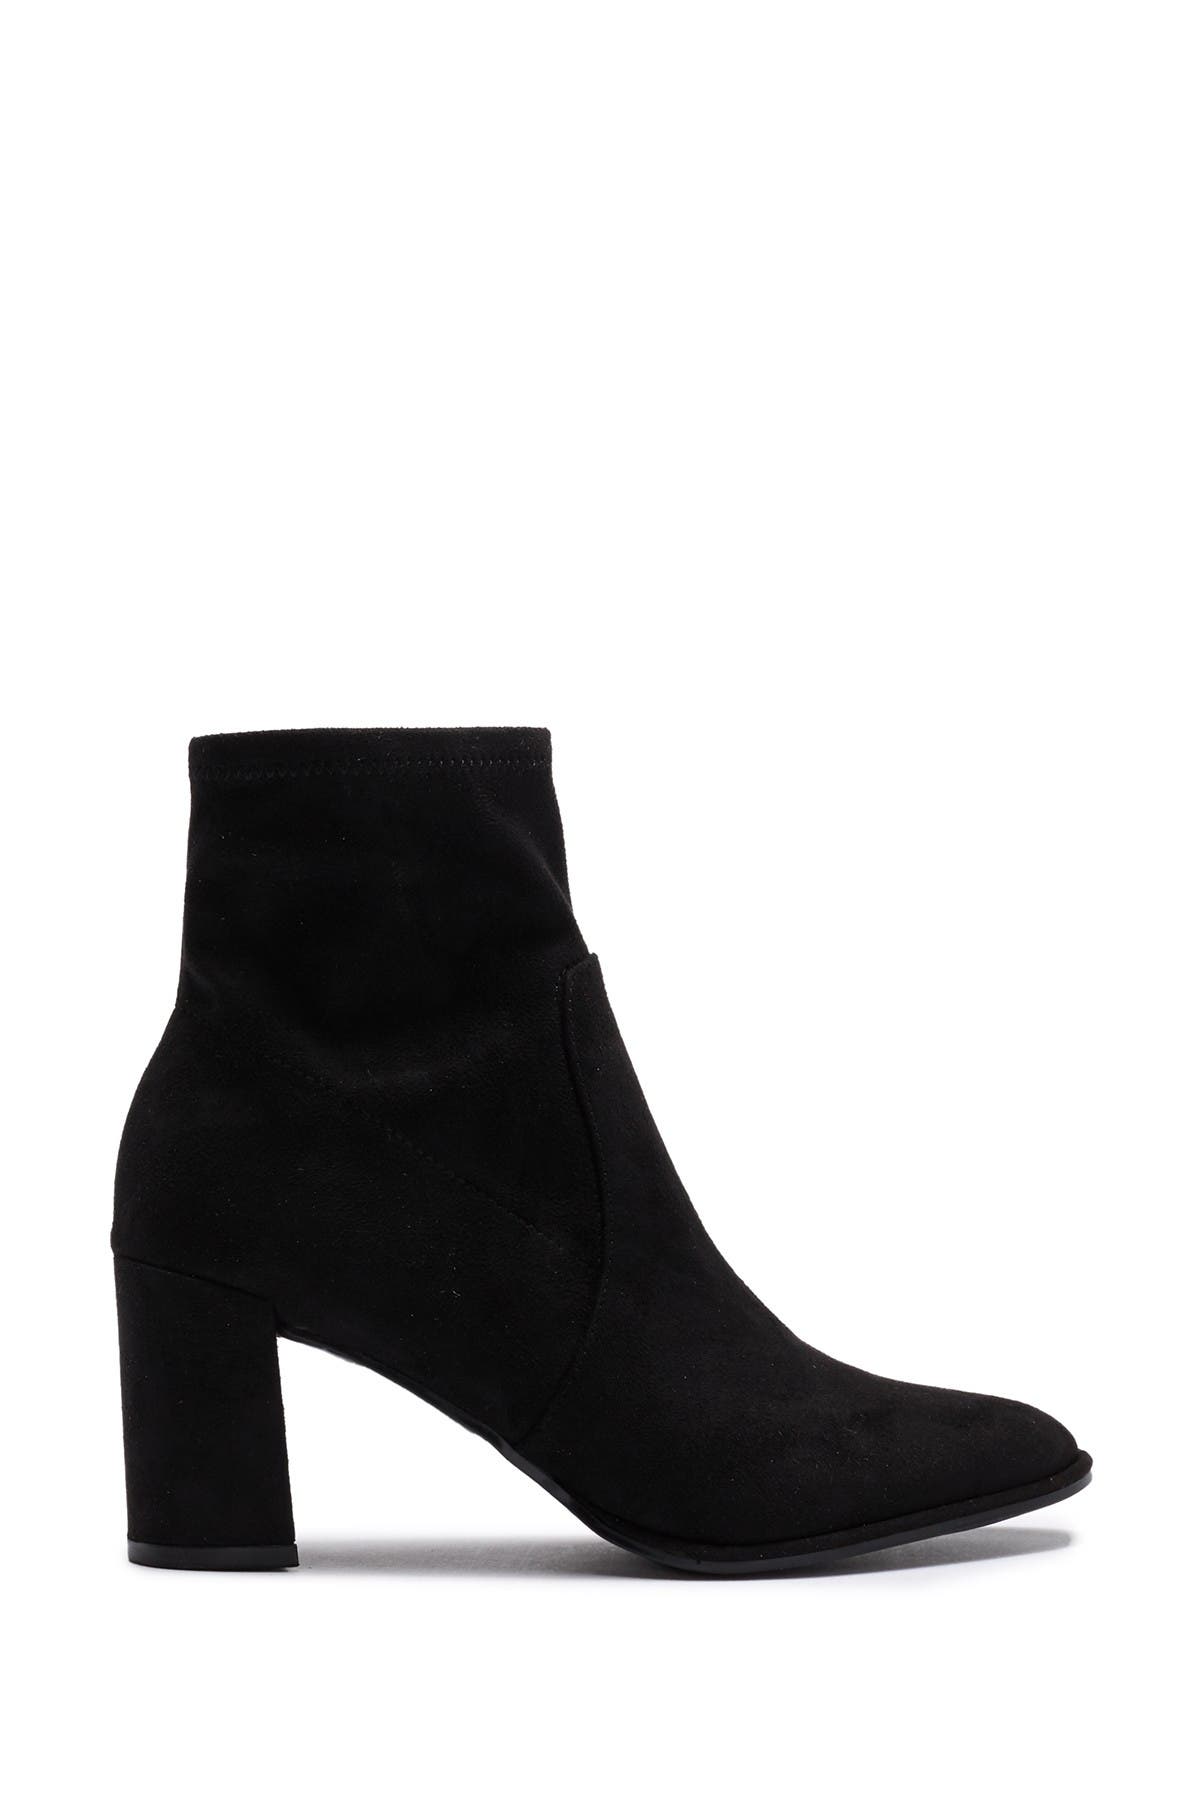 marc fisher lizzy bootie